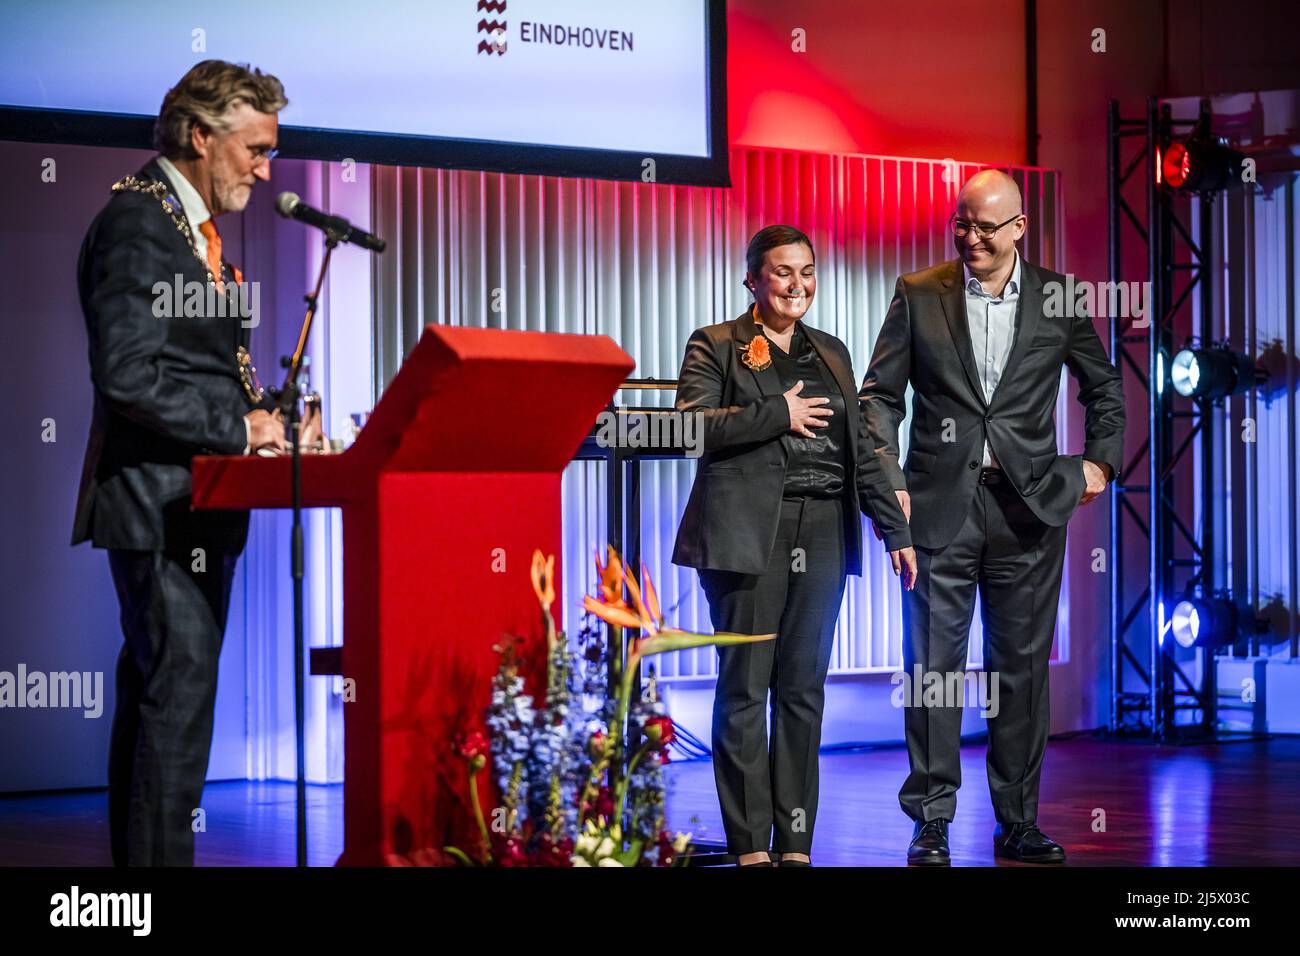 2022-04-26 10:26:25 EINDHOVEN - Lawyer for the victims of the allowance affair Eva Gonzalez Perez receives a royal award from mayor John Jorritsma during the annual ribbon rain. Perez has been appointed Knight in the Order of Orange-Nassau. ANP ROB ANGELAAR netherlands out - belgium out Stock Photo